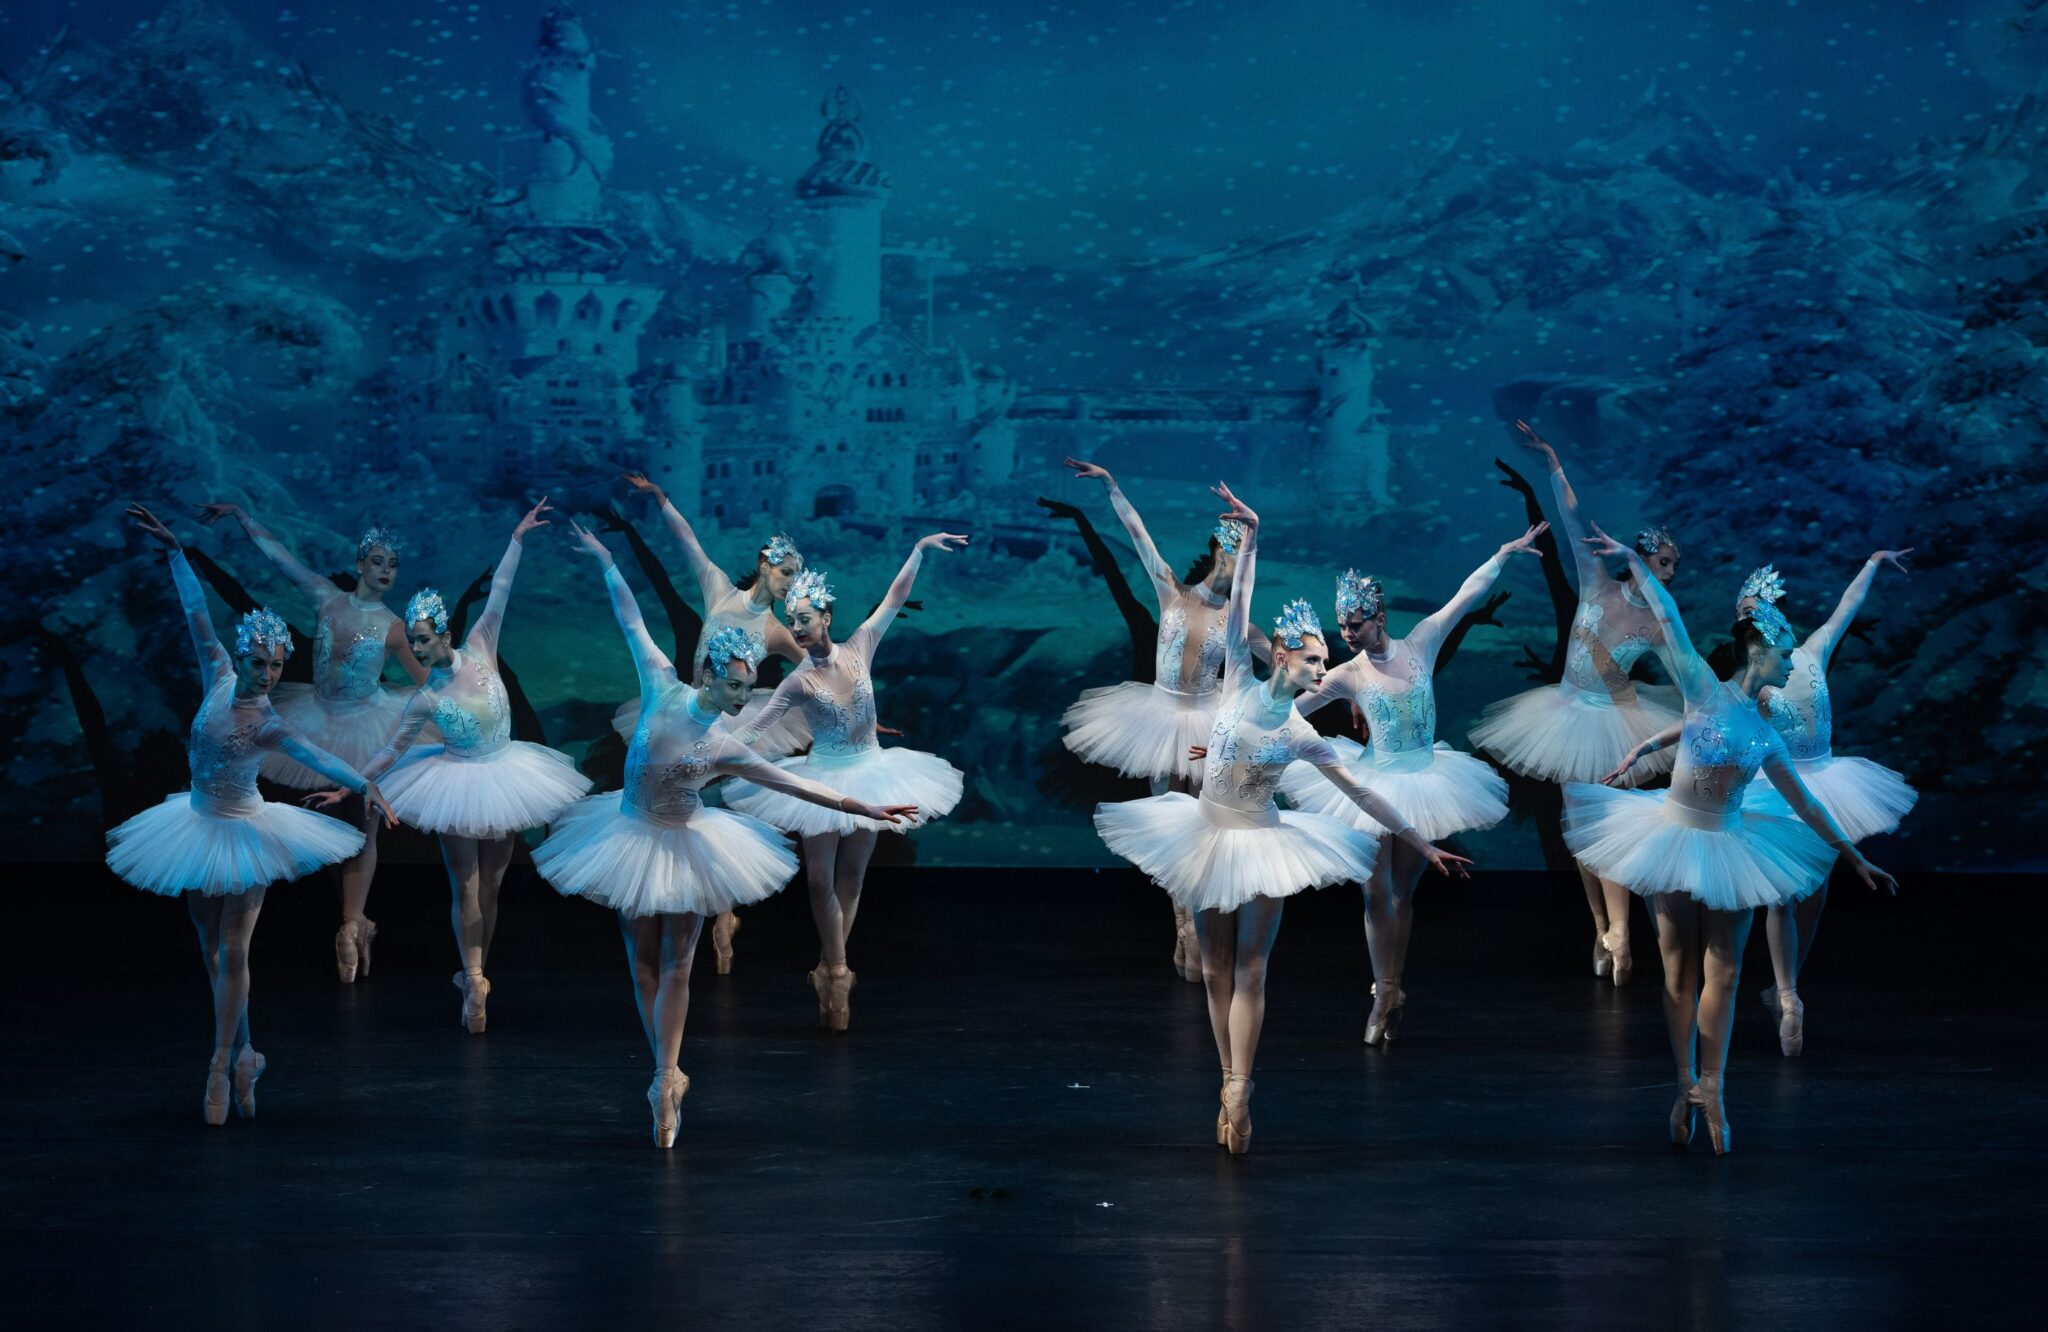 Treat your minis to a night at the ballet! The Victorian State Ballet is bringing The Snow Queen to Laycock Street Community Theatre!